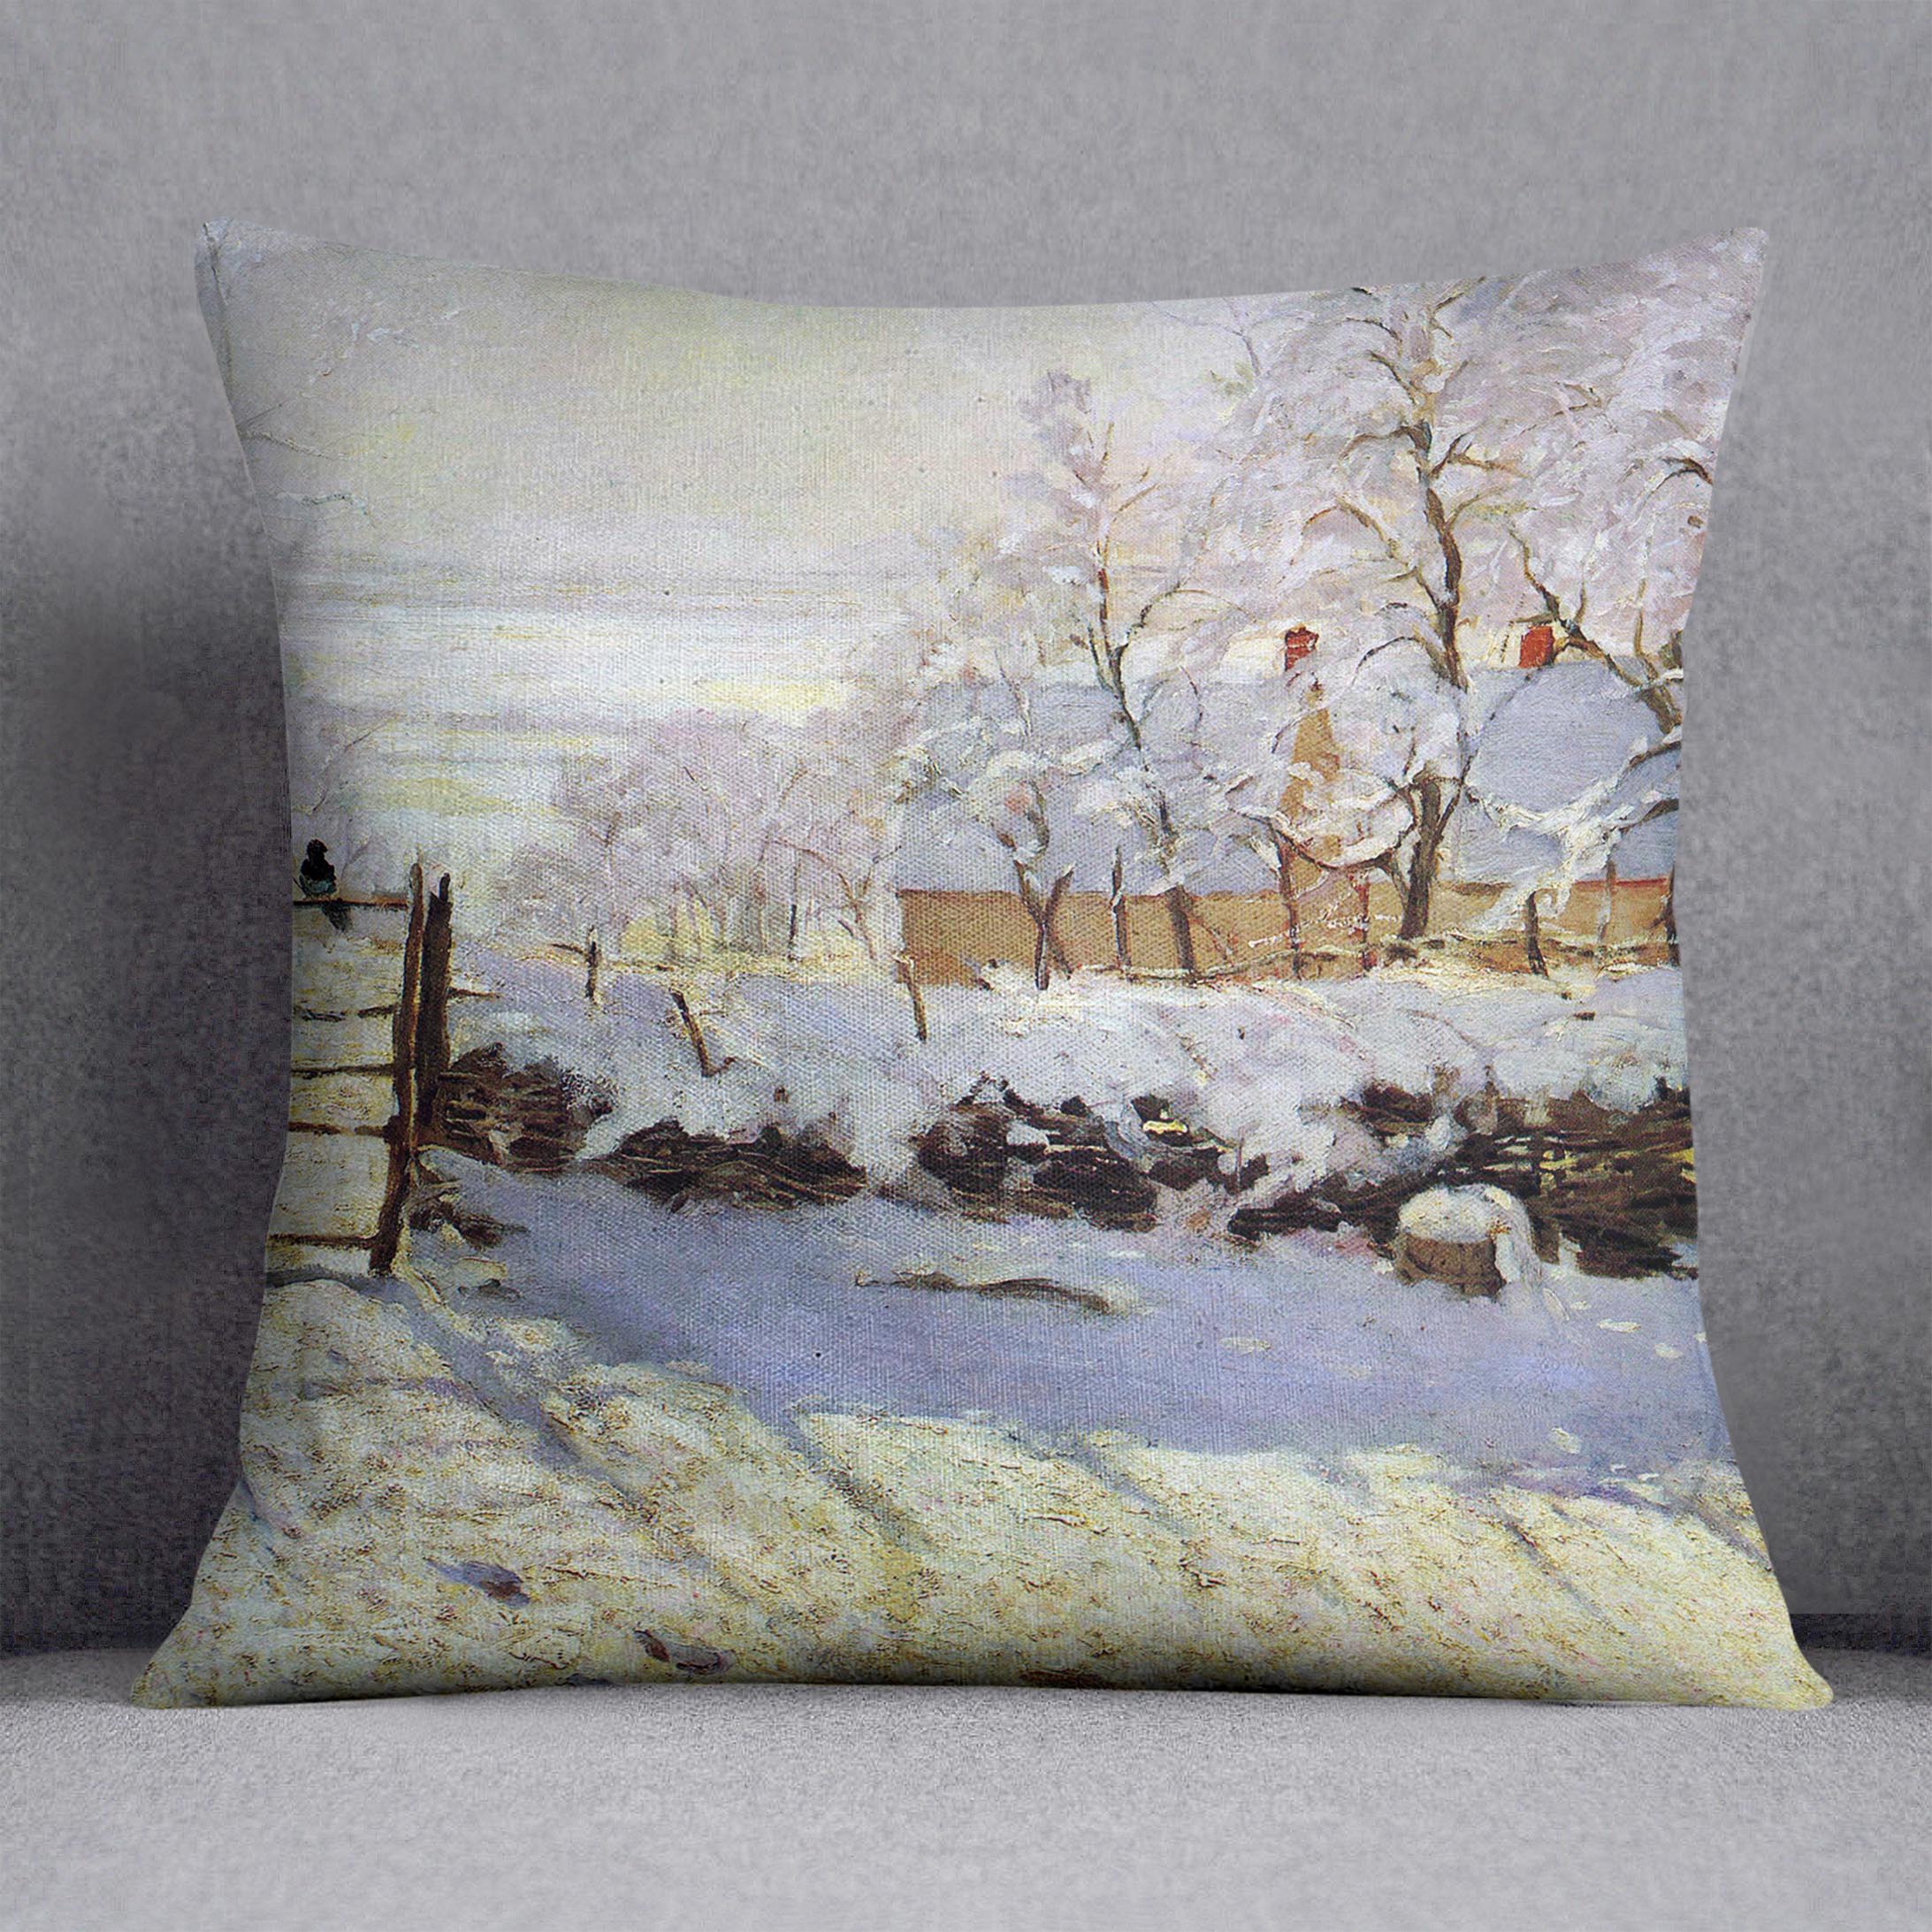 The Magpie by Monet Cushion